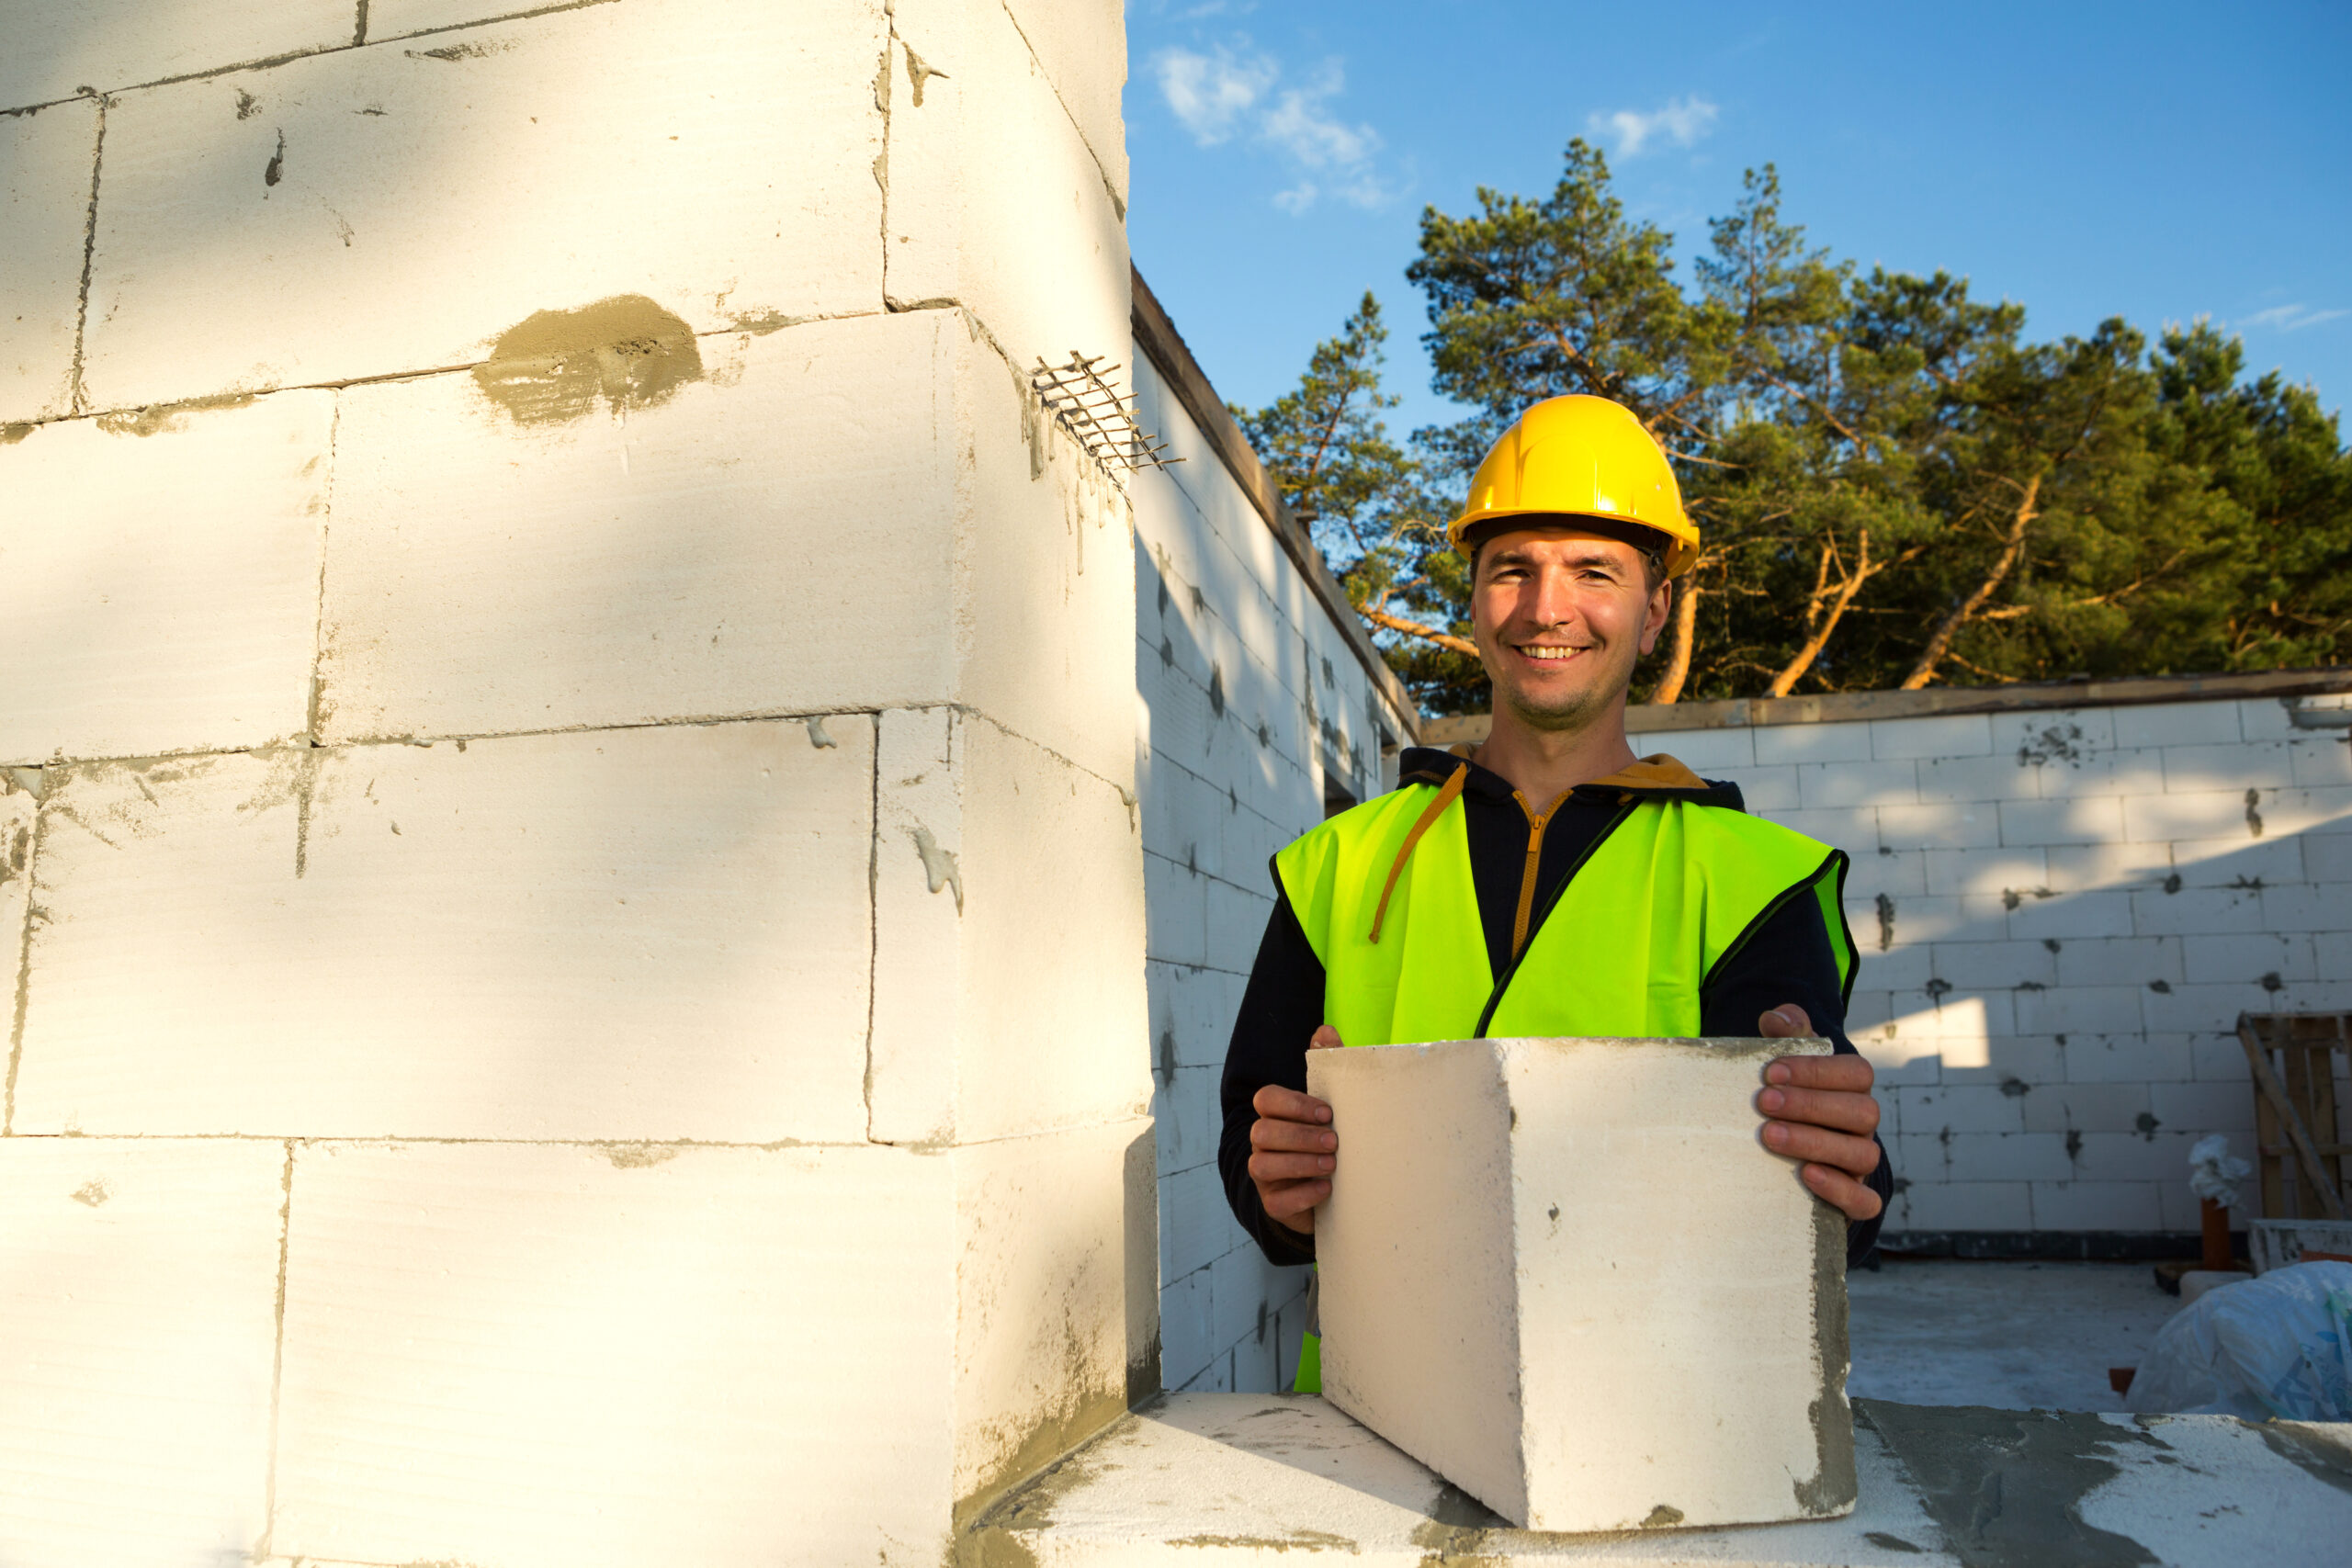 The builder holds a block of cellular concrete in his hands - the masonry of the walls of the house. Construction workers in protective clothing-a hardhat and a reflective vest.